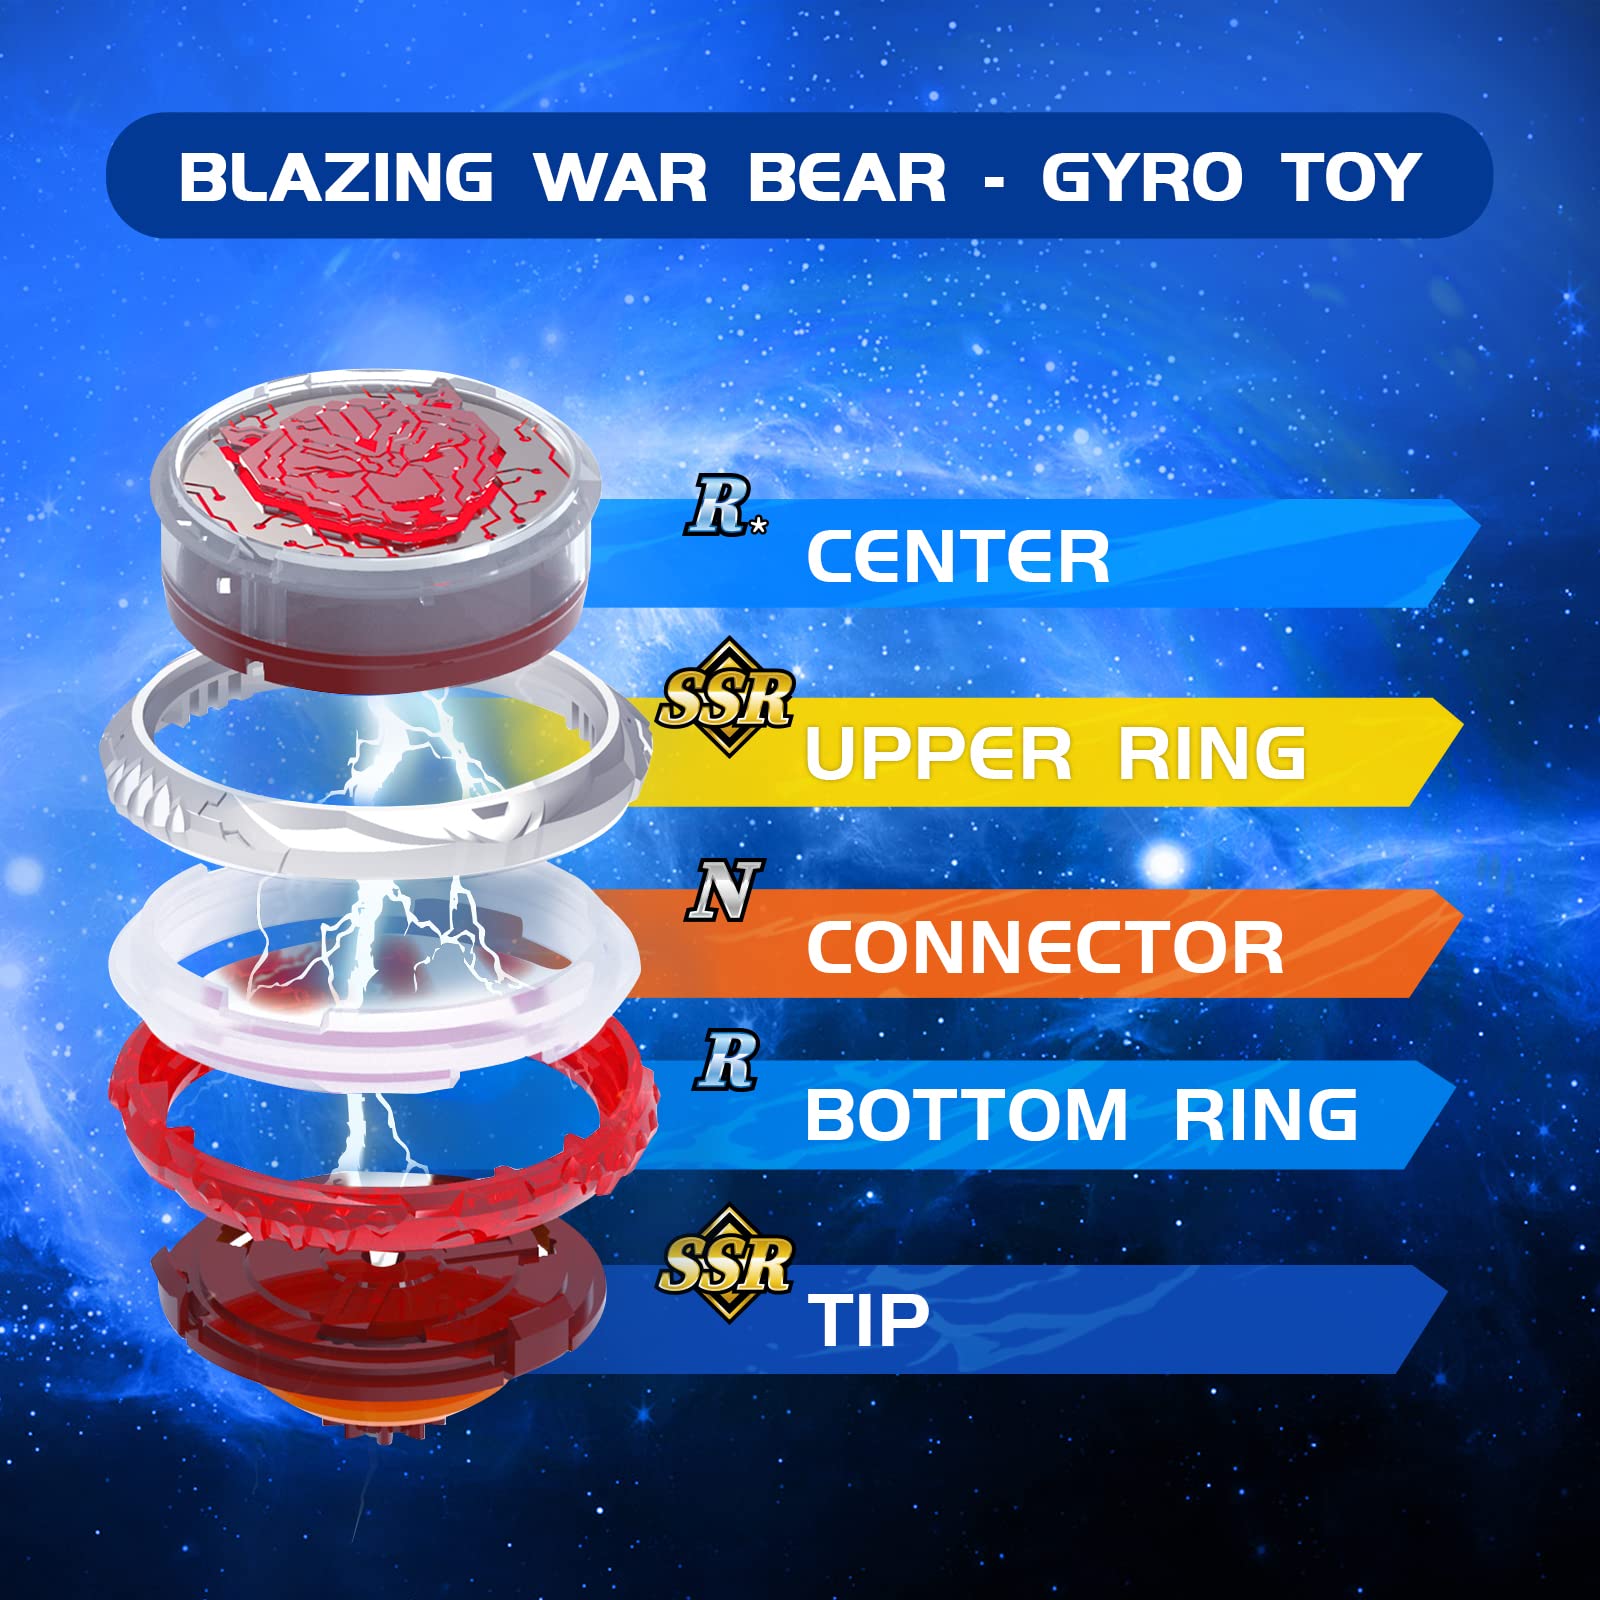 Bey Blade - Infinity Nado Bey Blade Stadium - Battling Tops Burst Toy for Boys Grils Age 8-12 - Including Gaming Top Toys, Sword Launcher - Blazing War Bear, Flame Red